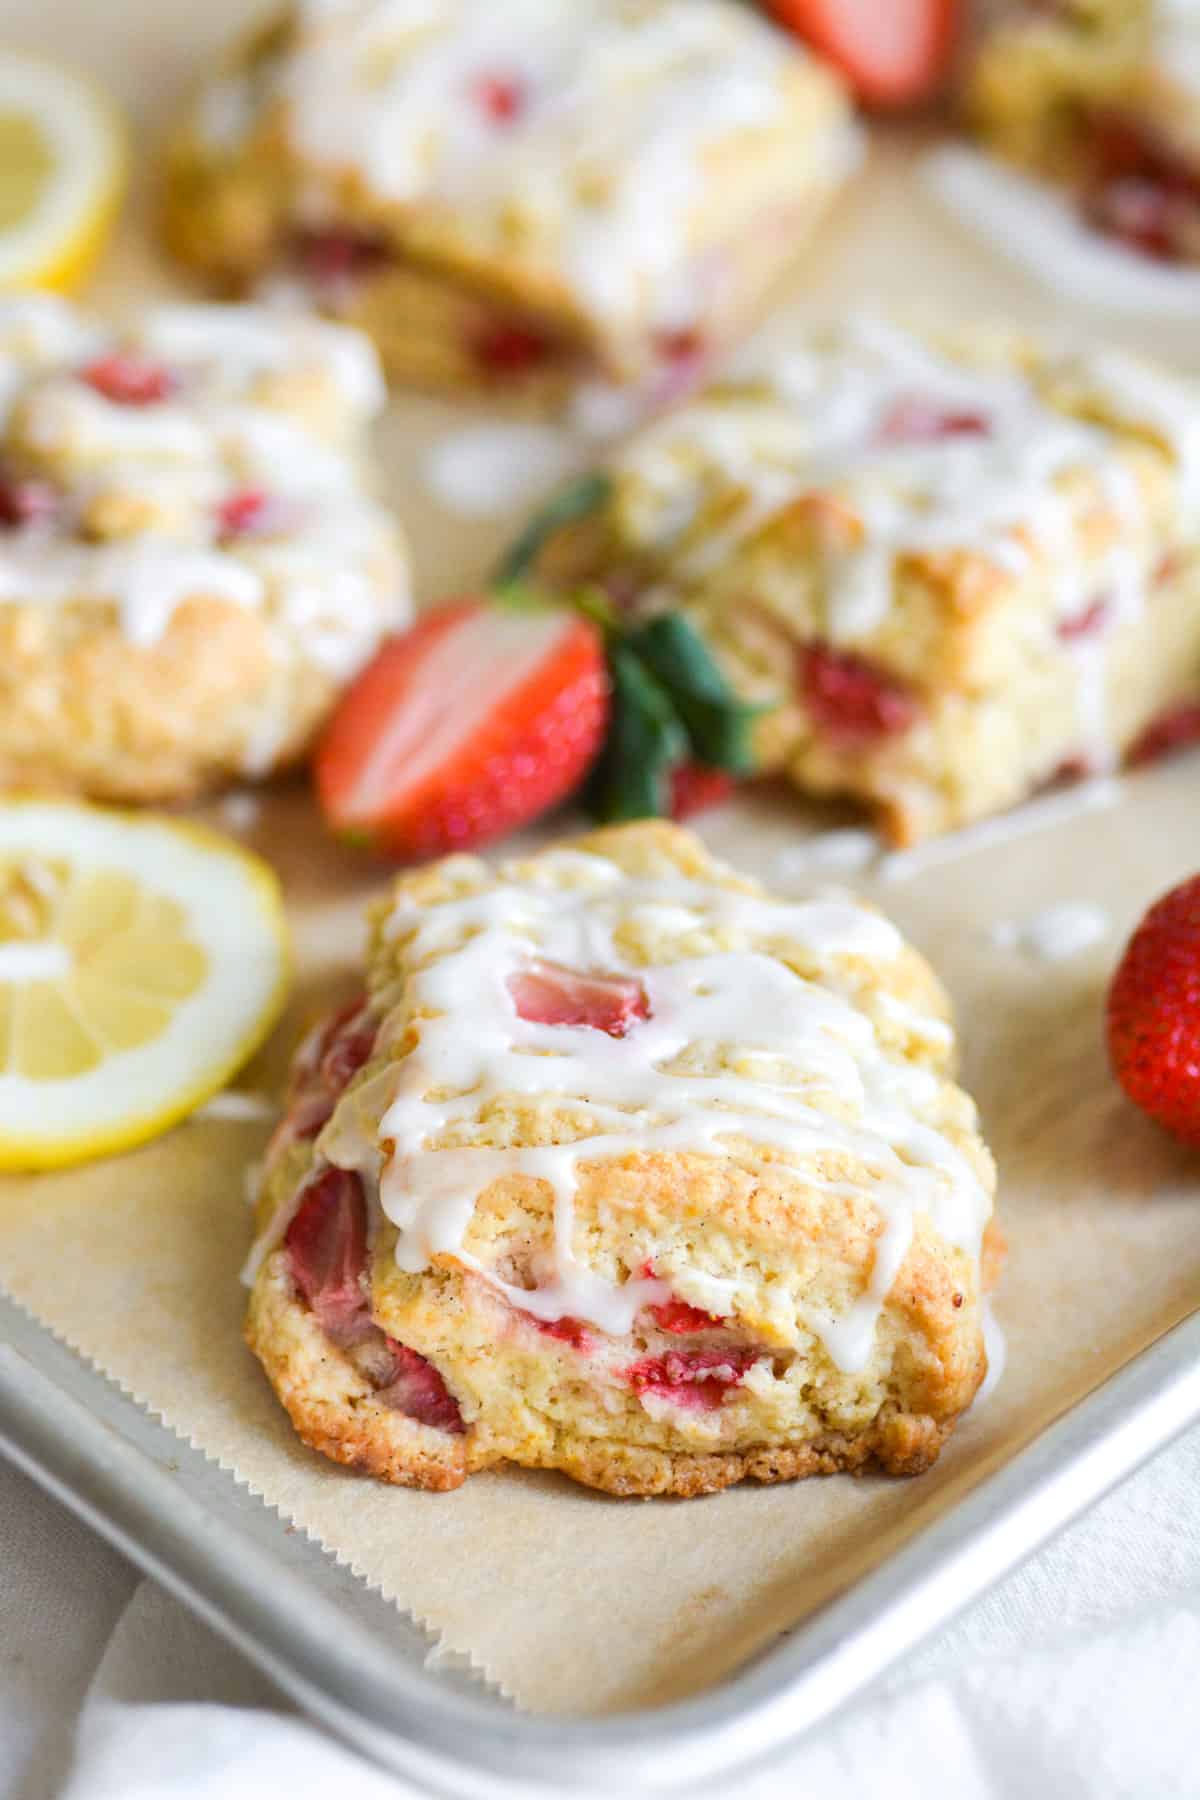 Vegan Lemon Strawberry Scones on a baking sheet with slices of lemon and strawberries in the scene.